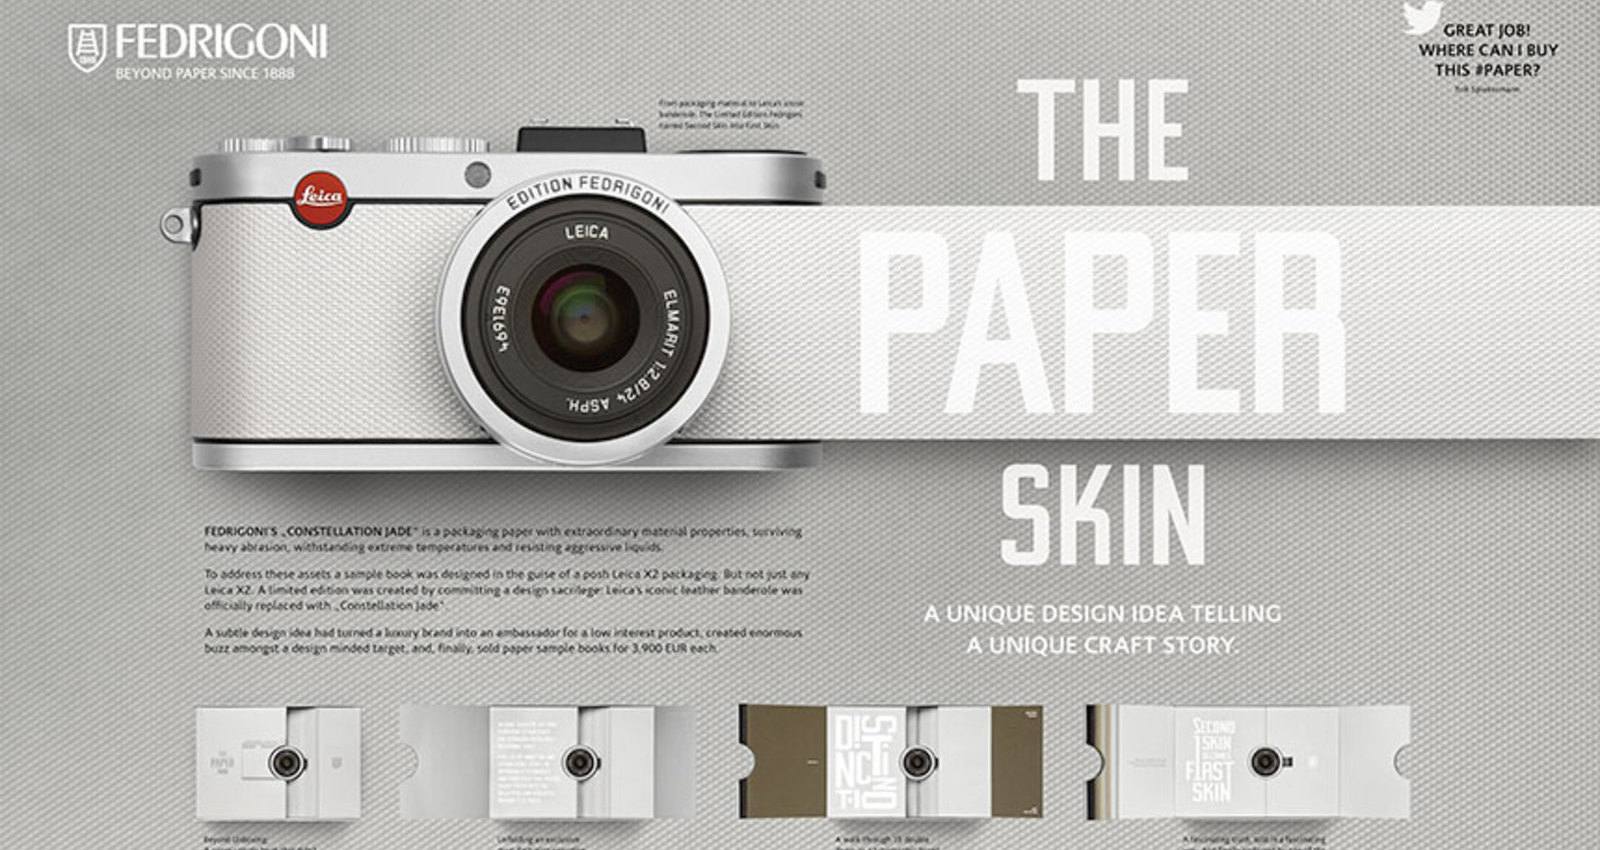 The Paper Skin